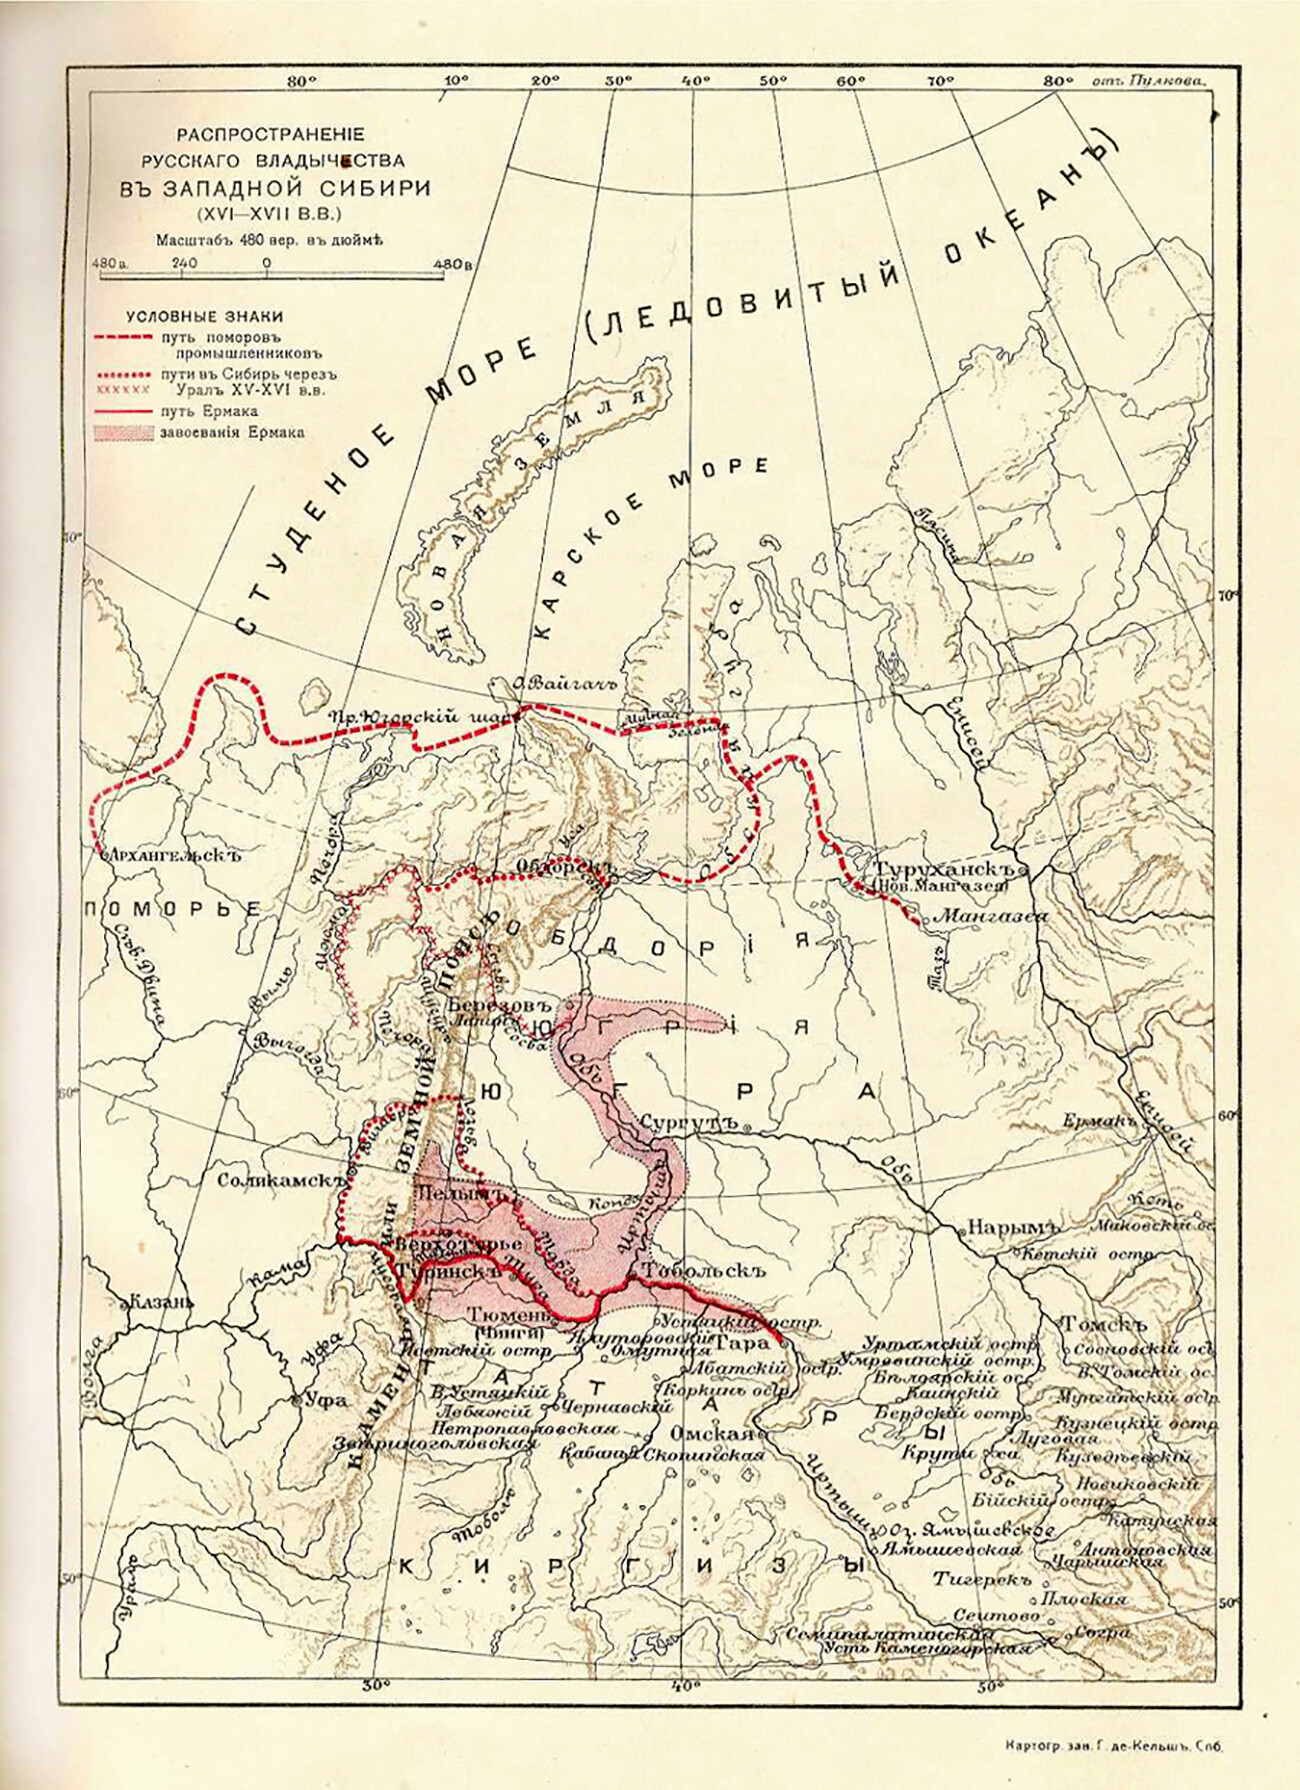 Map of the conquest of Western Siberia in the 16th century